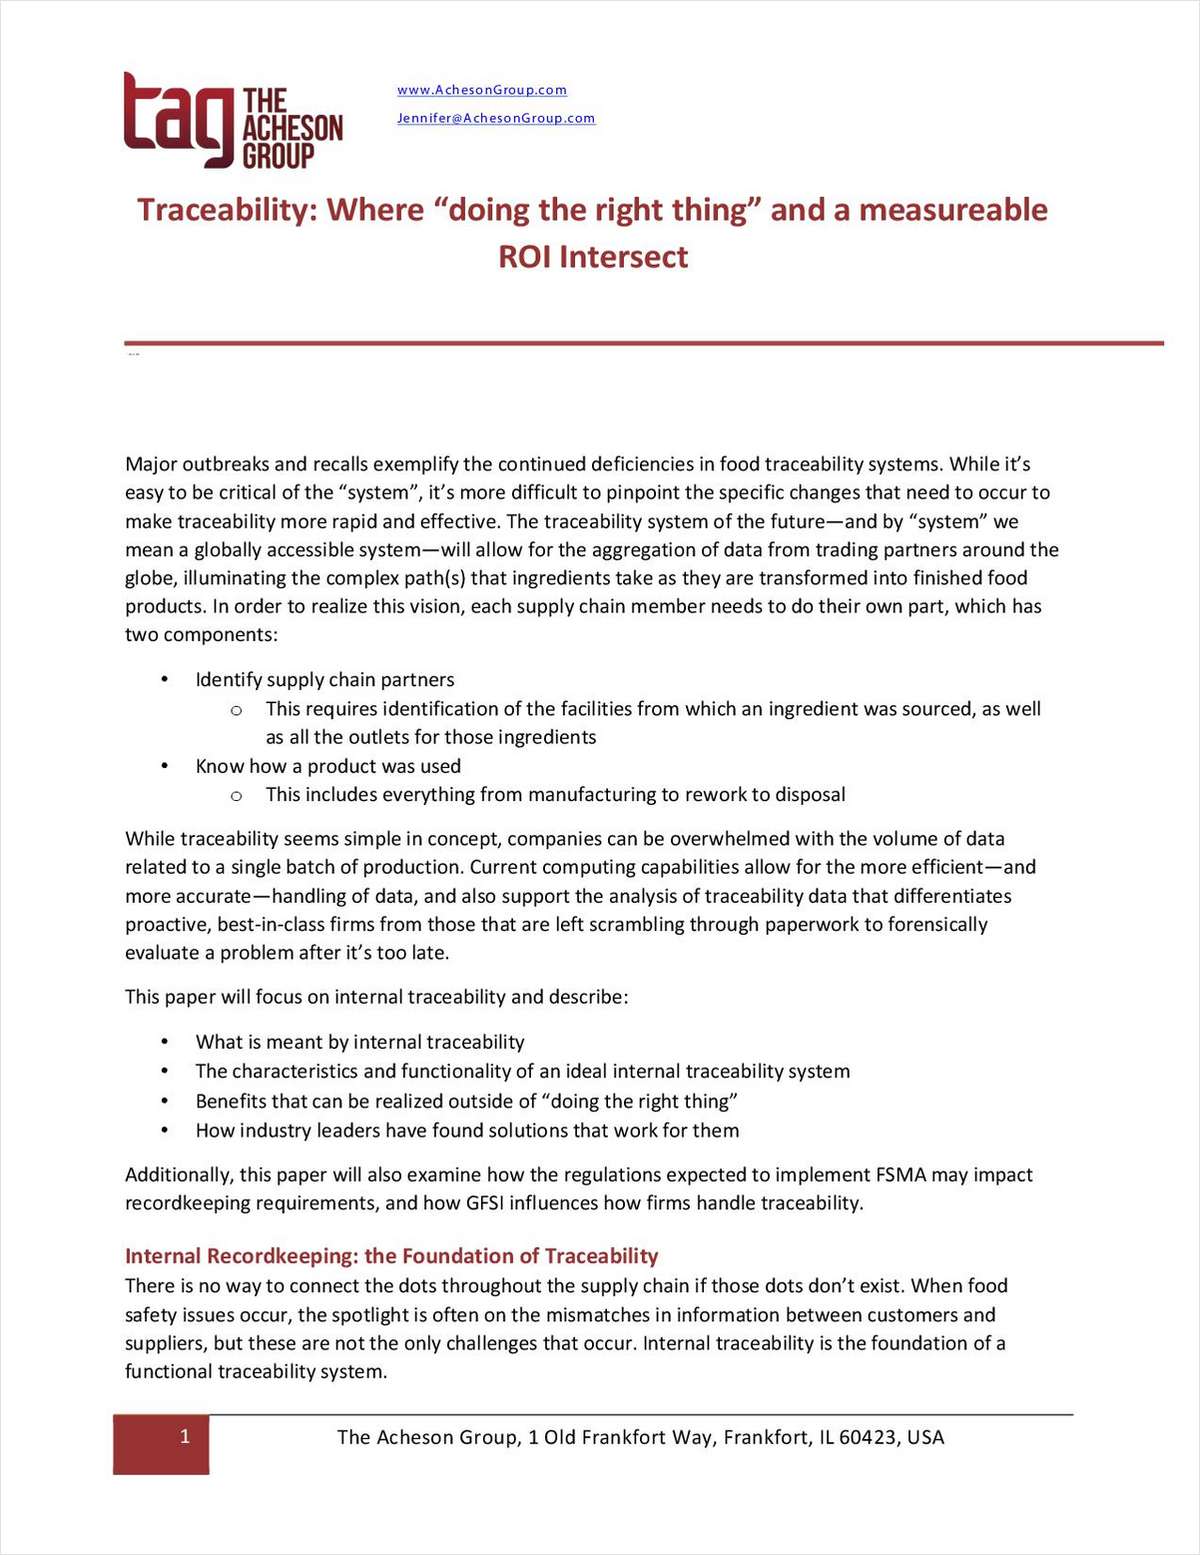 Traceability: Where 'Doing the Right Thing' and ROI Intersect